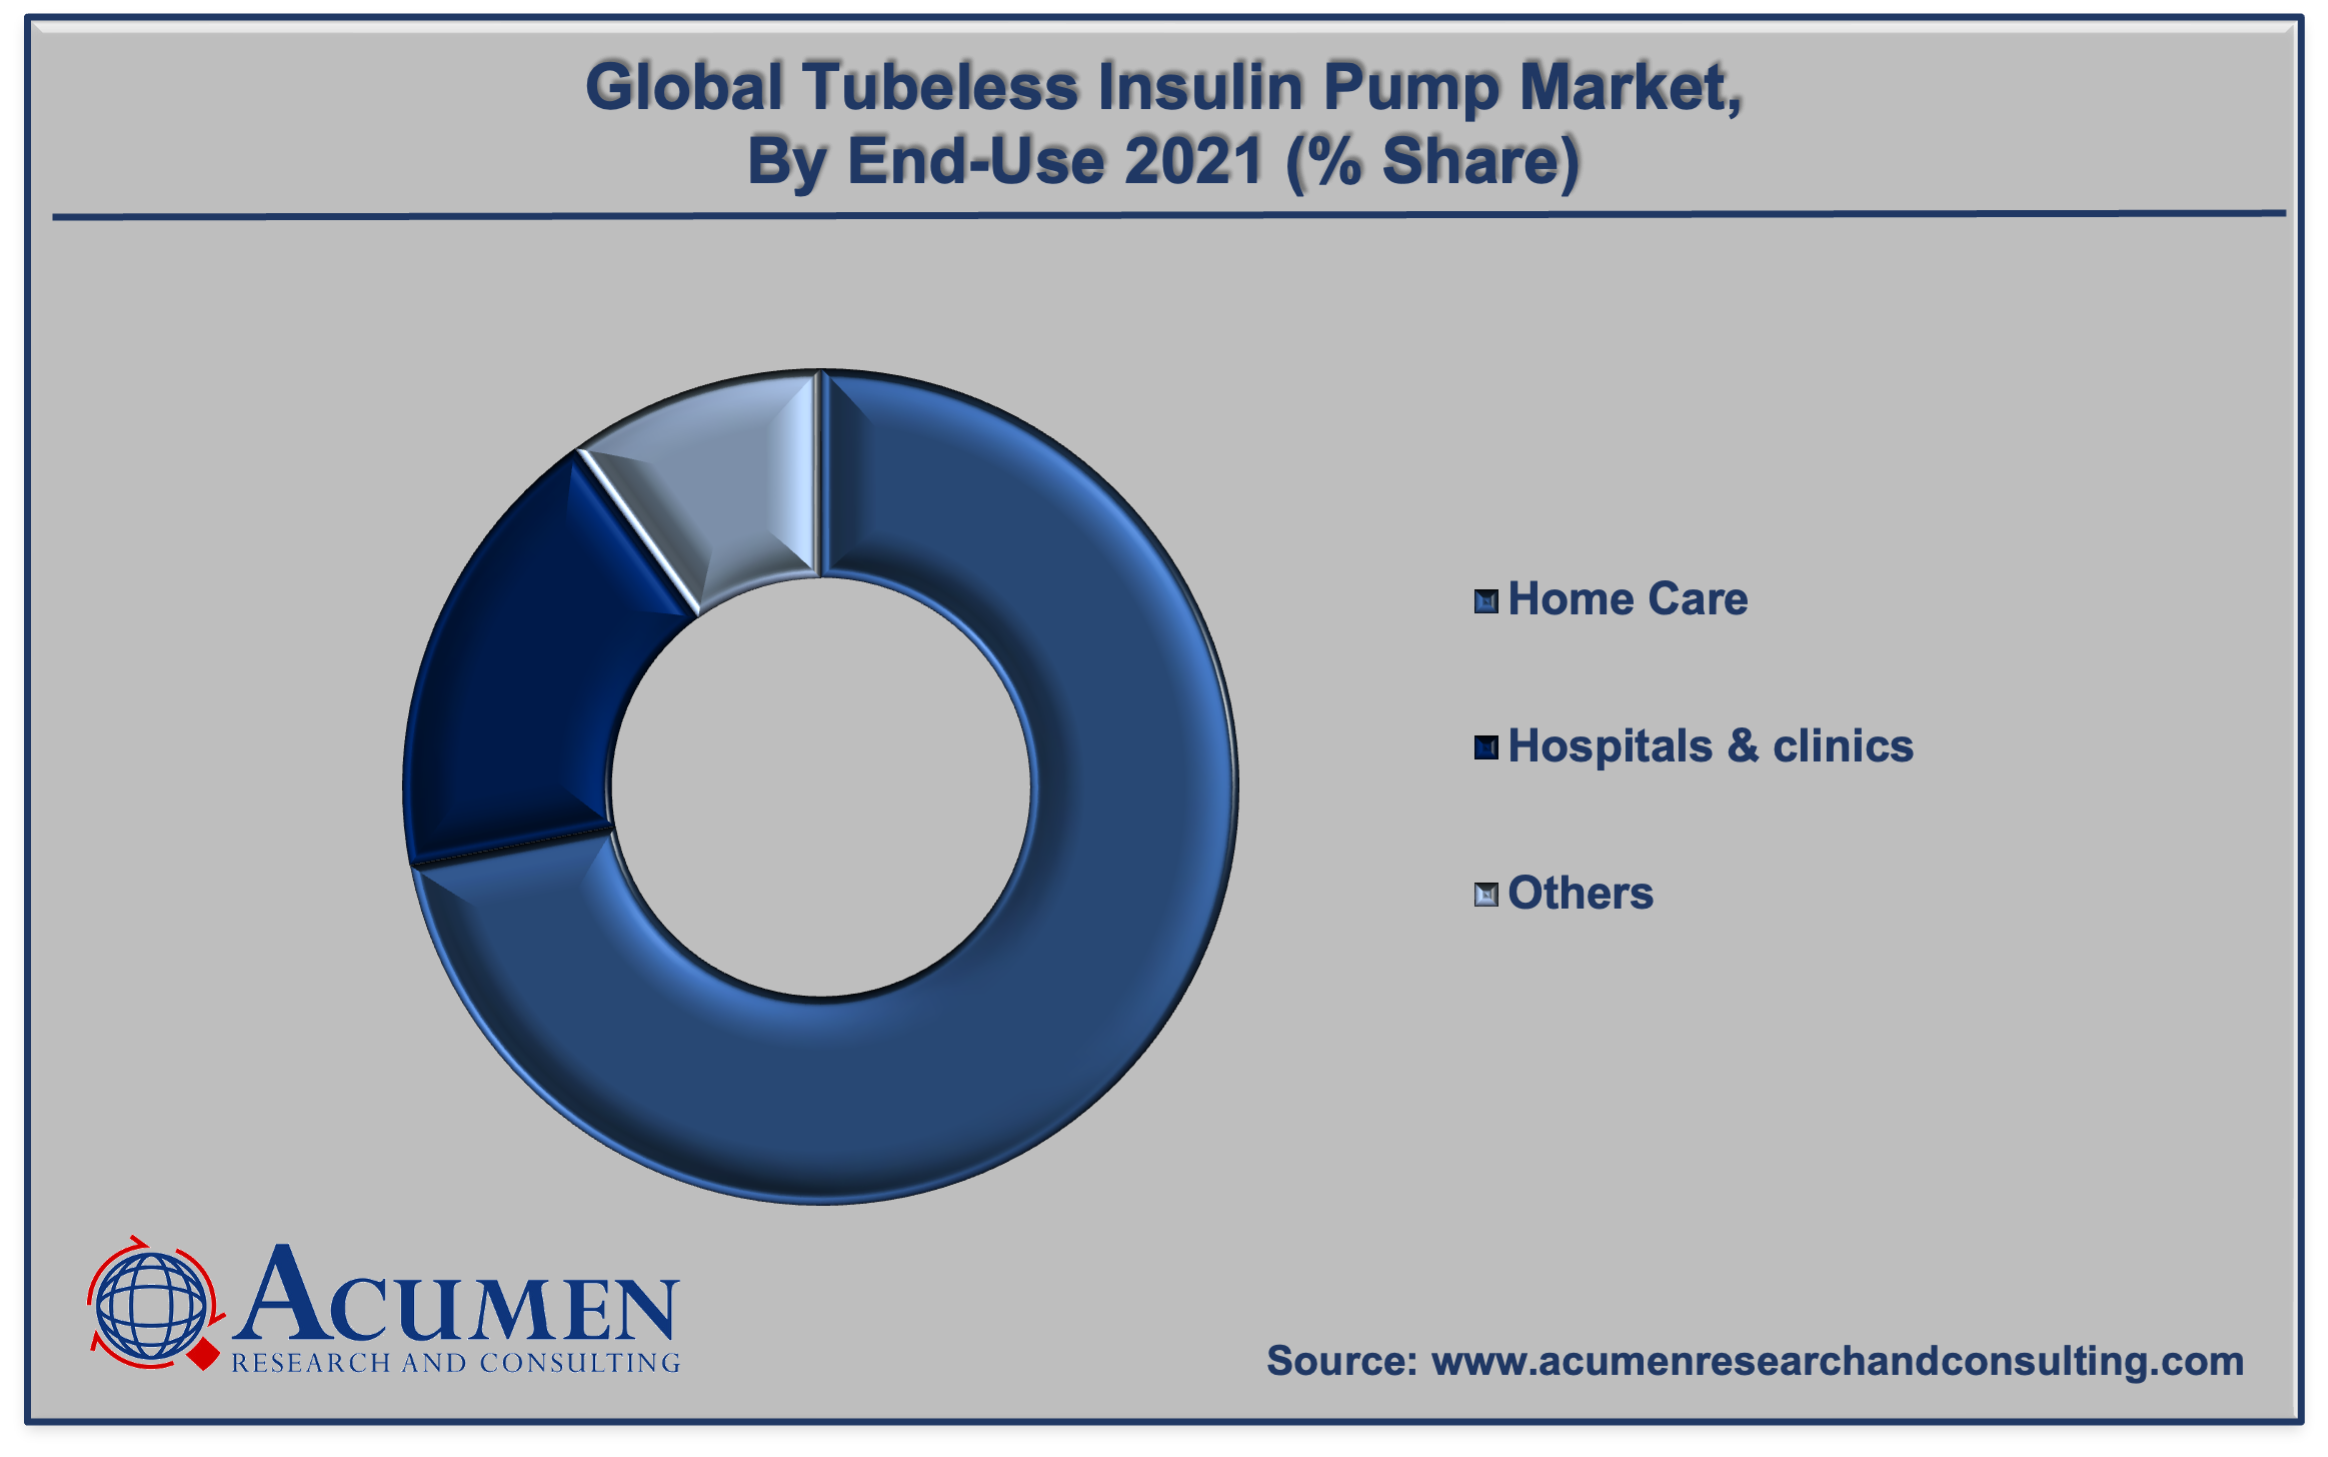 Tubeless Insulin Pump Market Share was accounted for USD 1,066 Million in 2021 and is estimated to reach the market value of USD 6,027 Million by 2030, growing at a CAGR of 21.7% from 2022 to 2030.